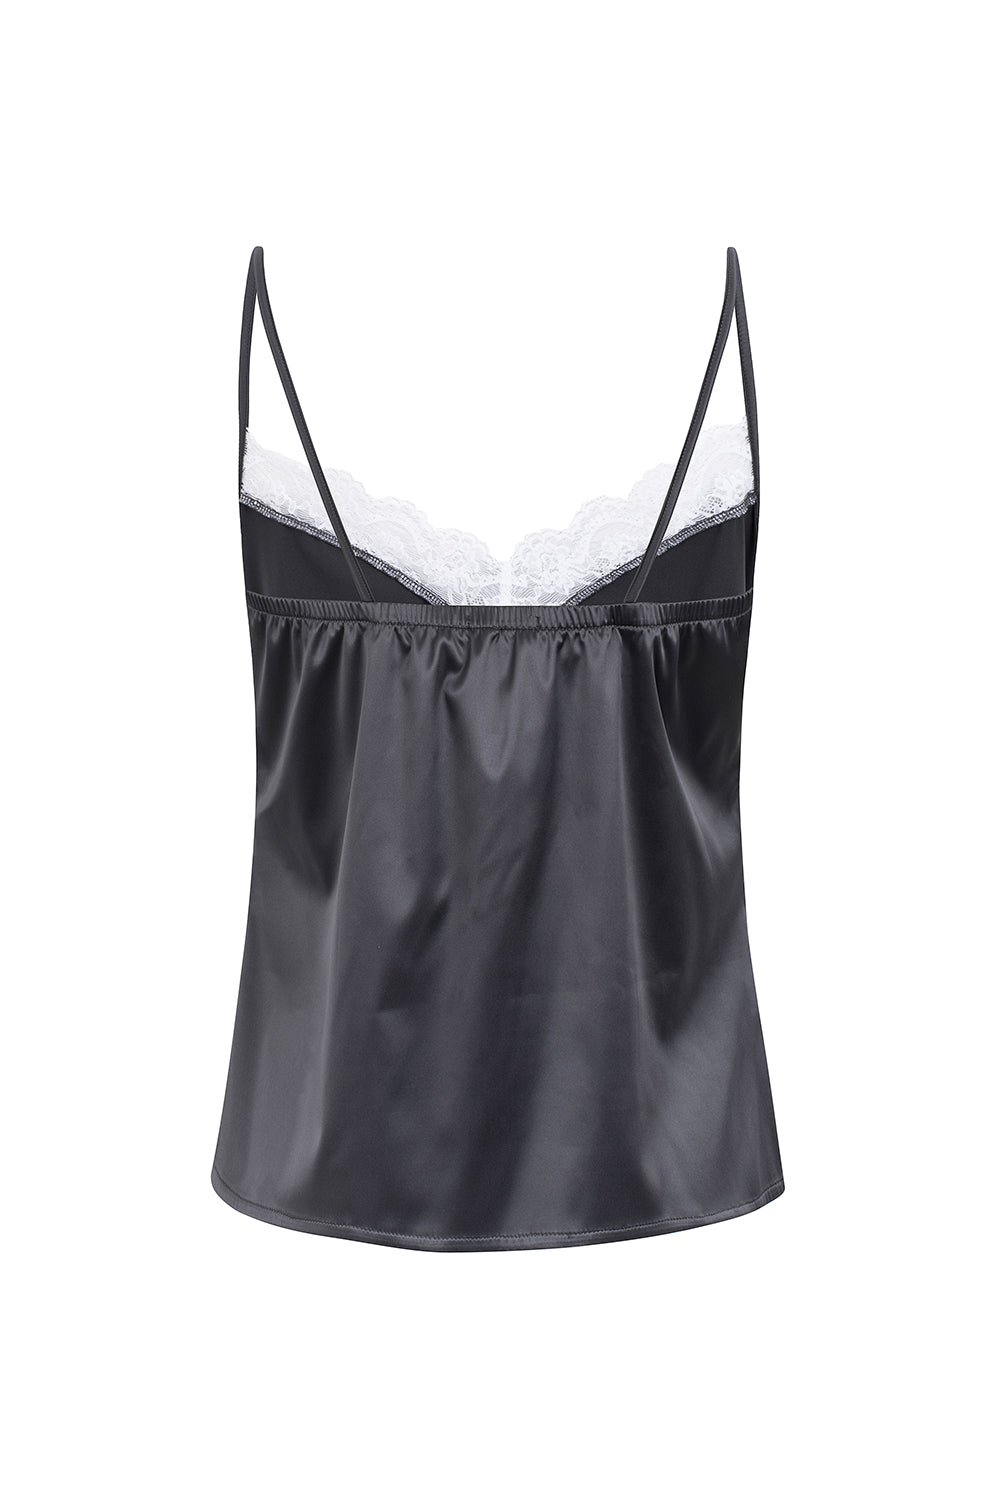 DARK GRAY SATIN &amp; LACE TOP (OUT OF STOCK)